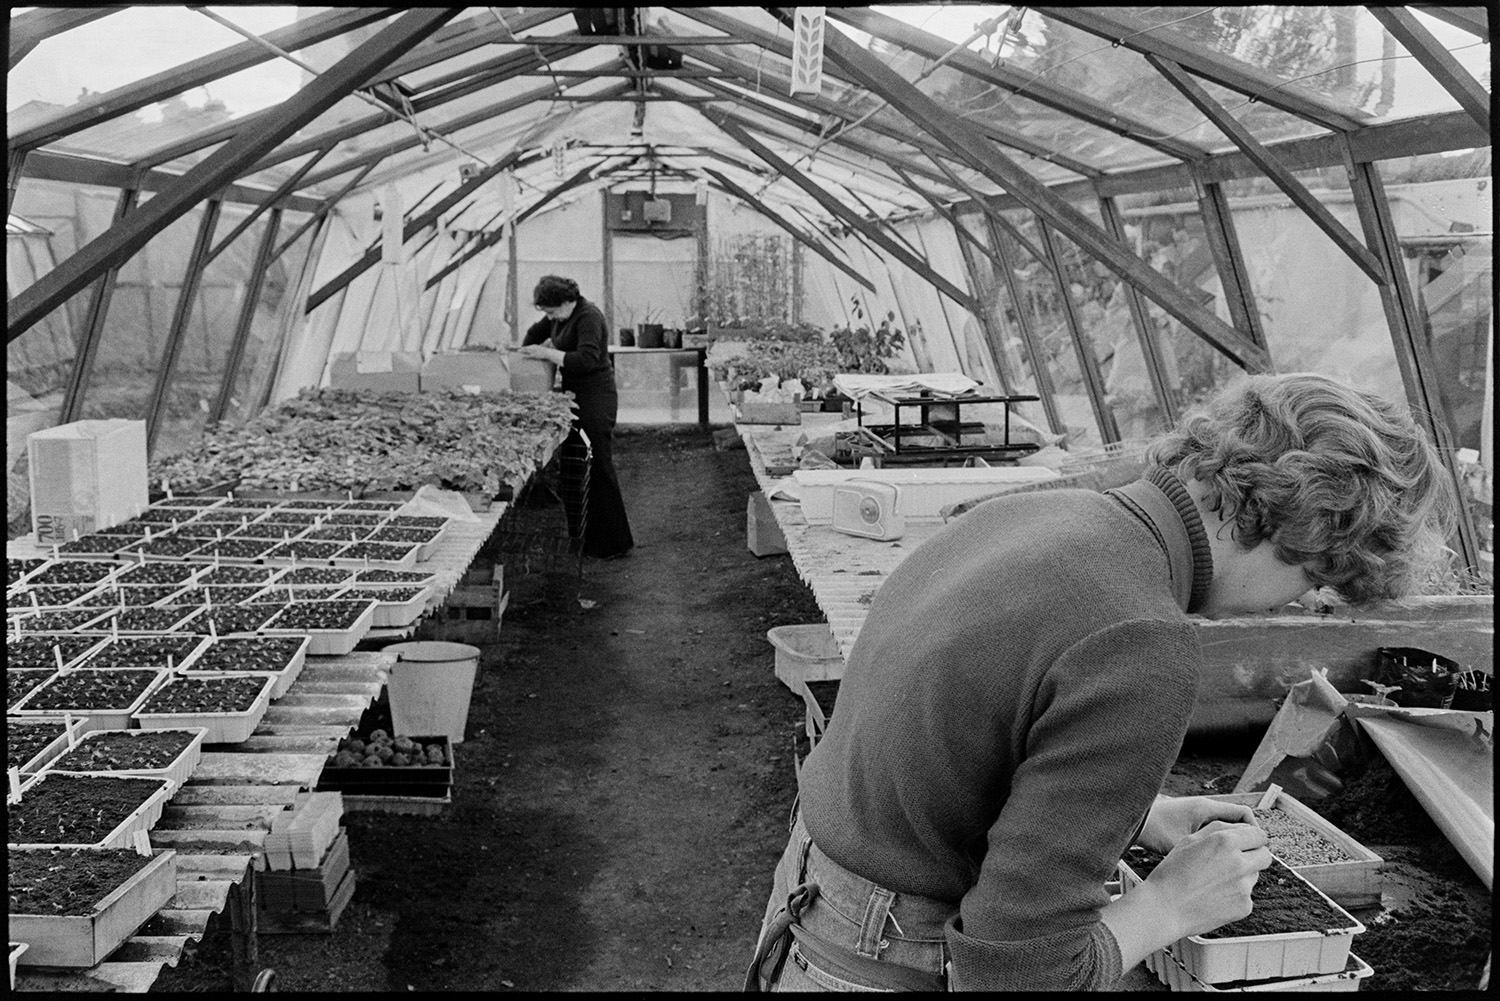 Man watering plants in greenhouse. 
[Two women planting seeds in a greenhouse in School Lane, Torrington. Other types of plants are also visible in the greenhouse.]